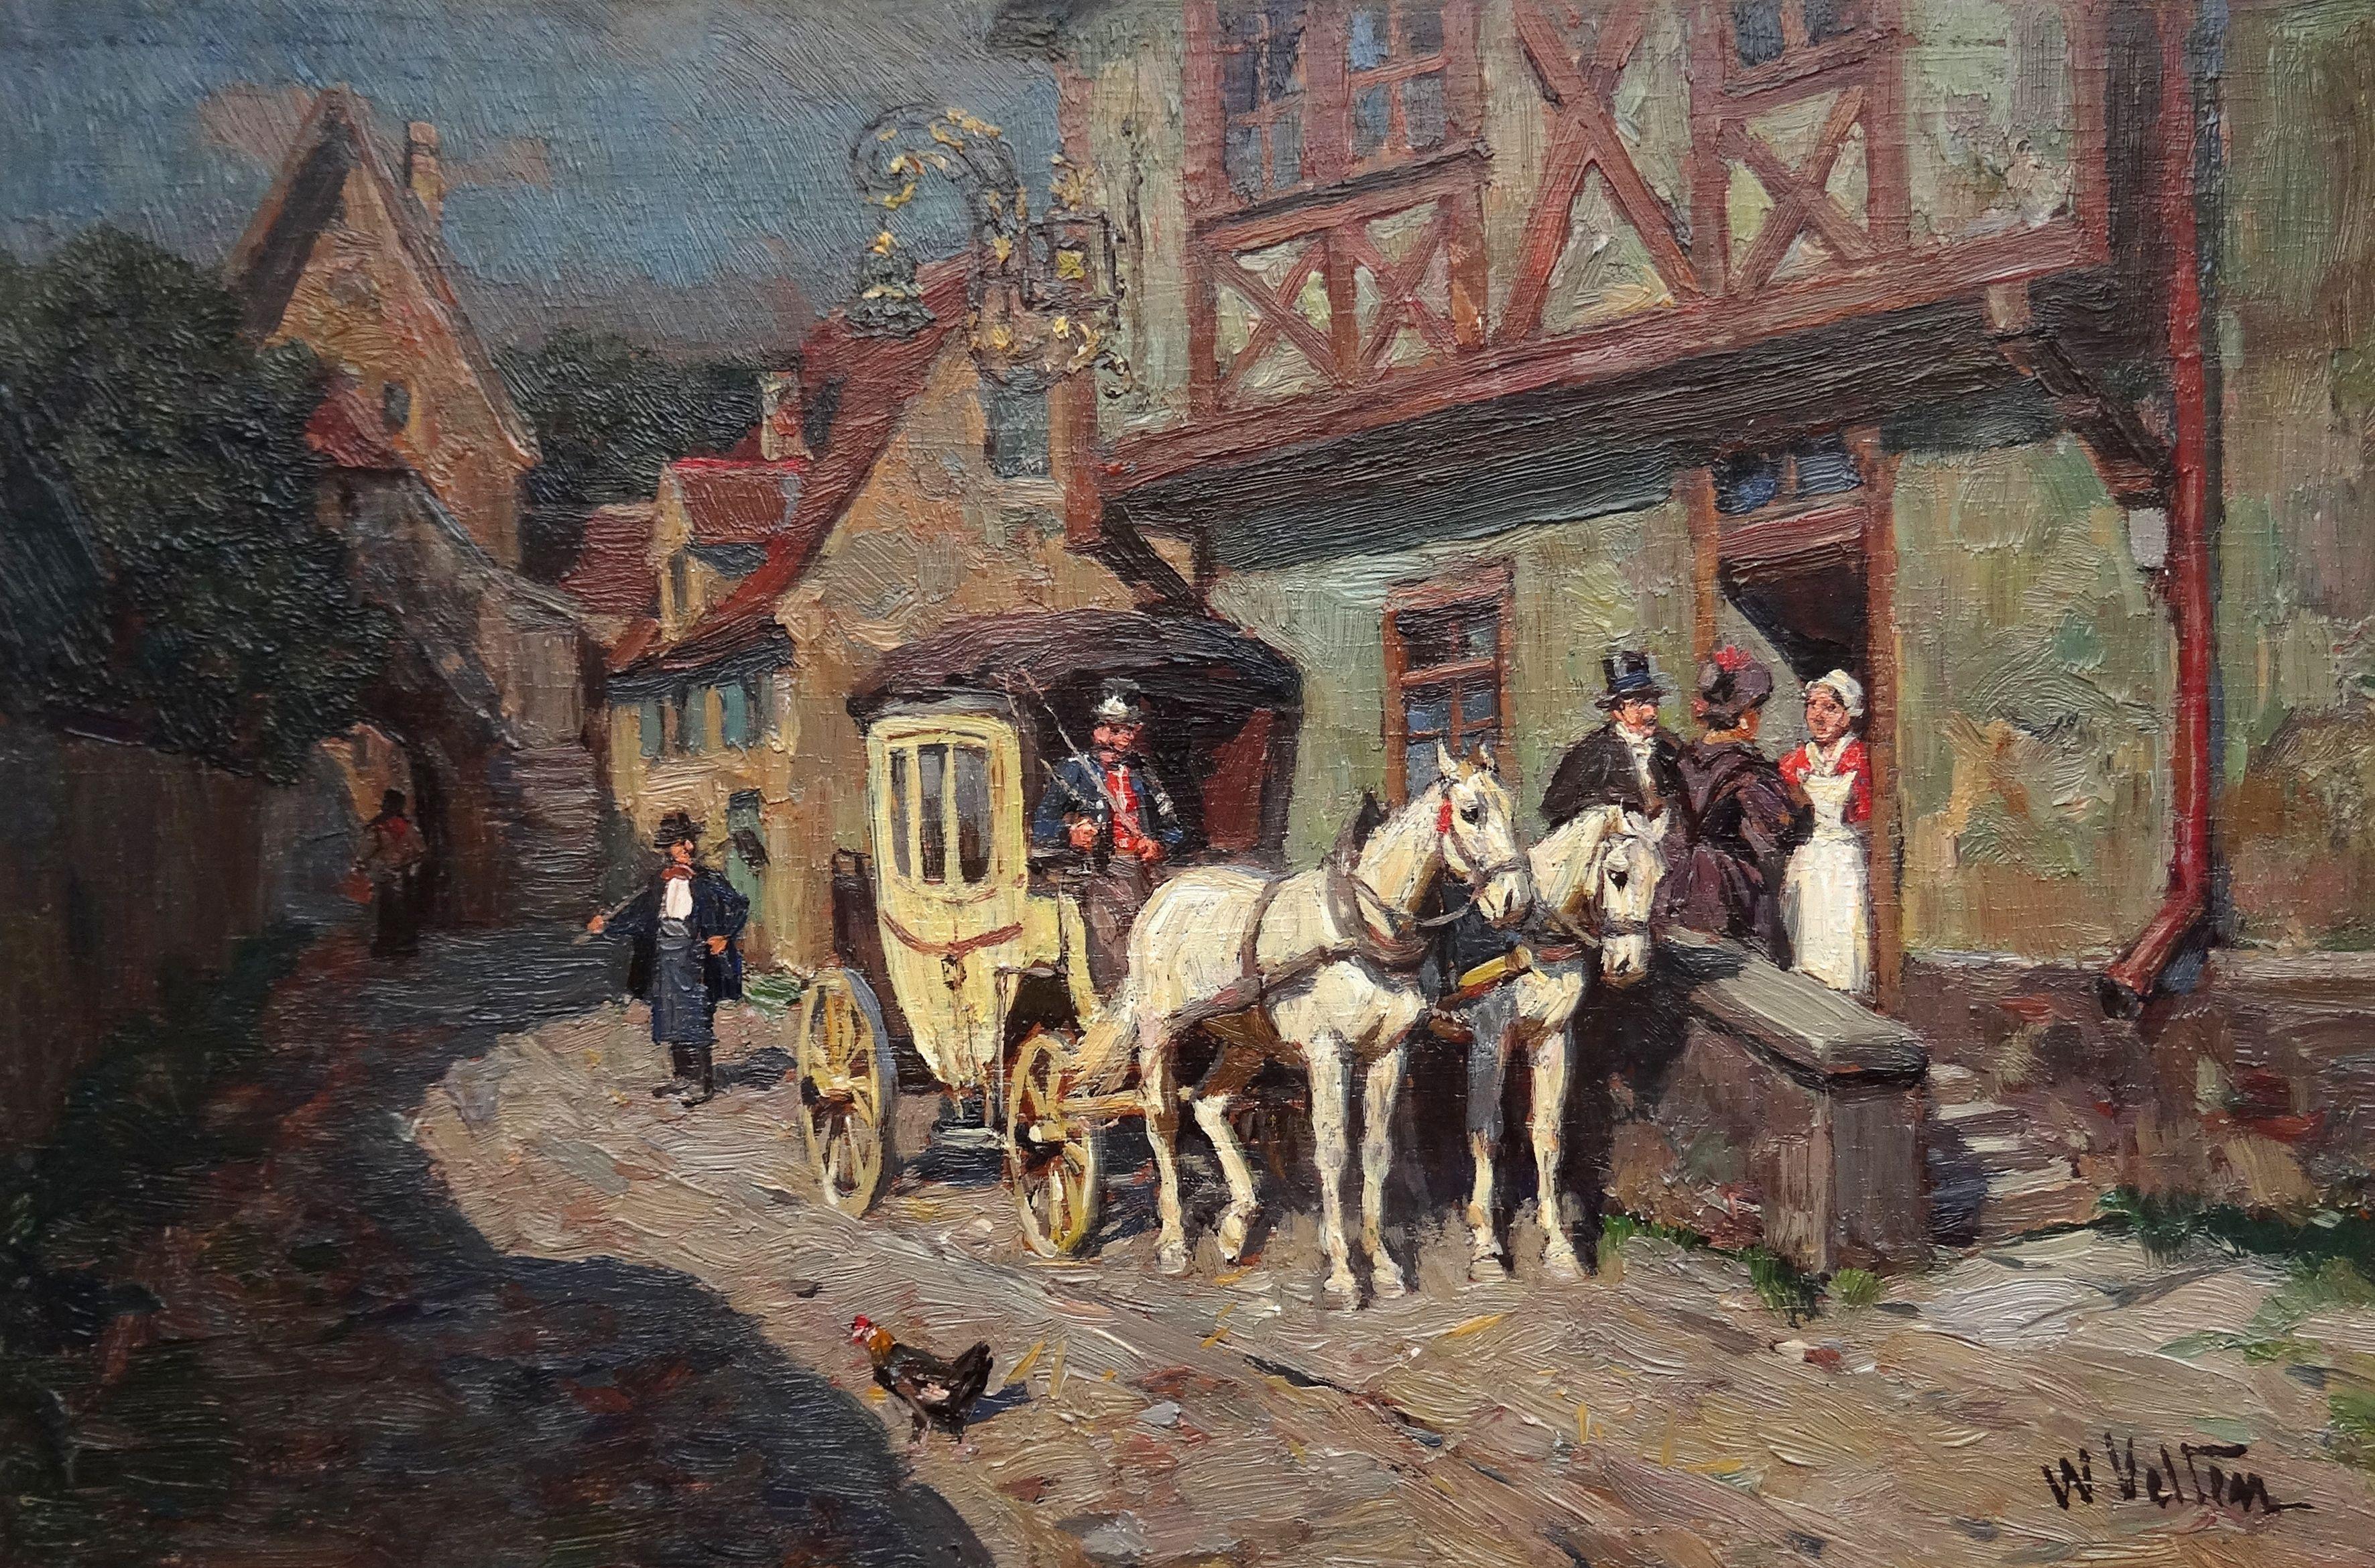 Horses with carriage. Oil on panel. 16.1 x 24.2 cm